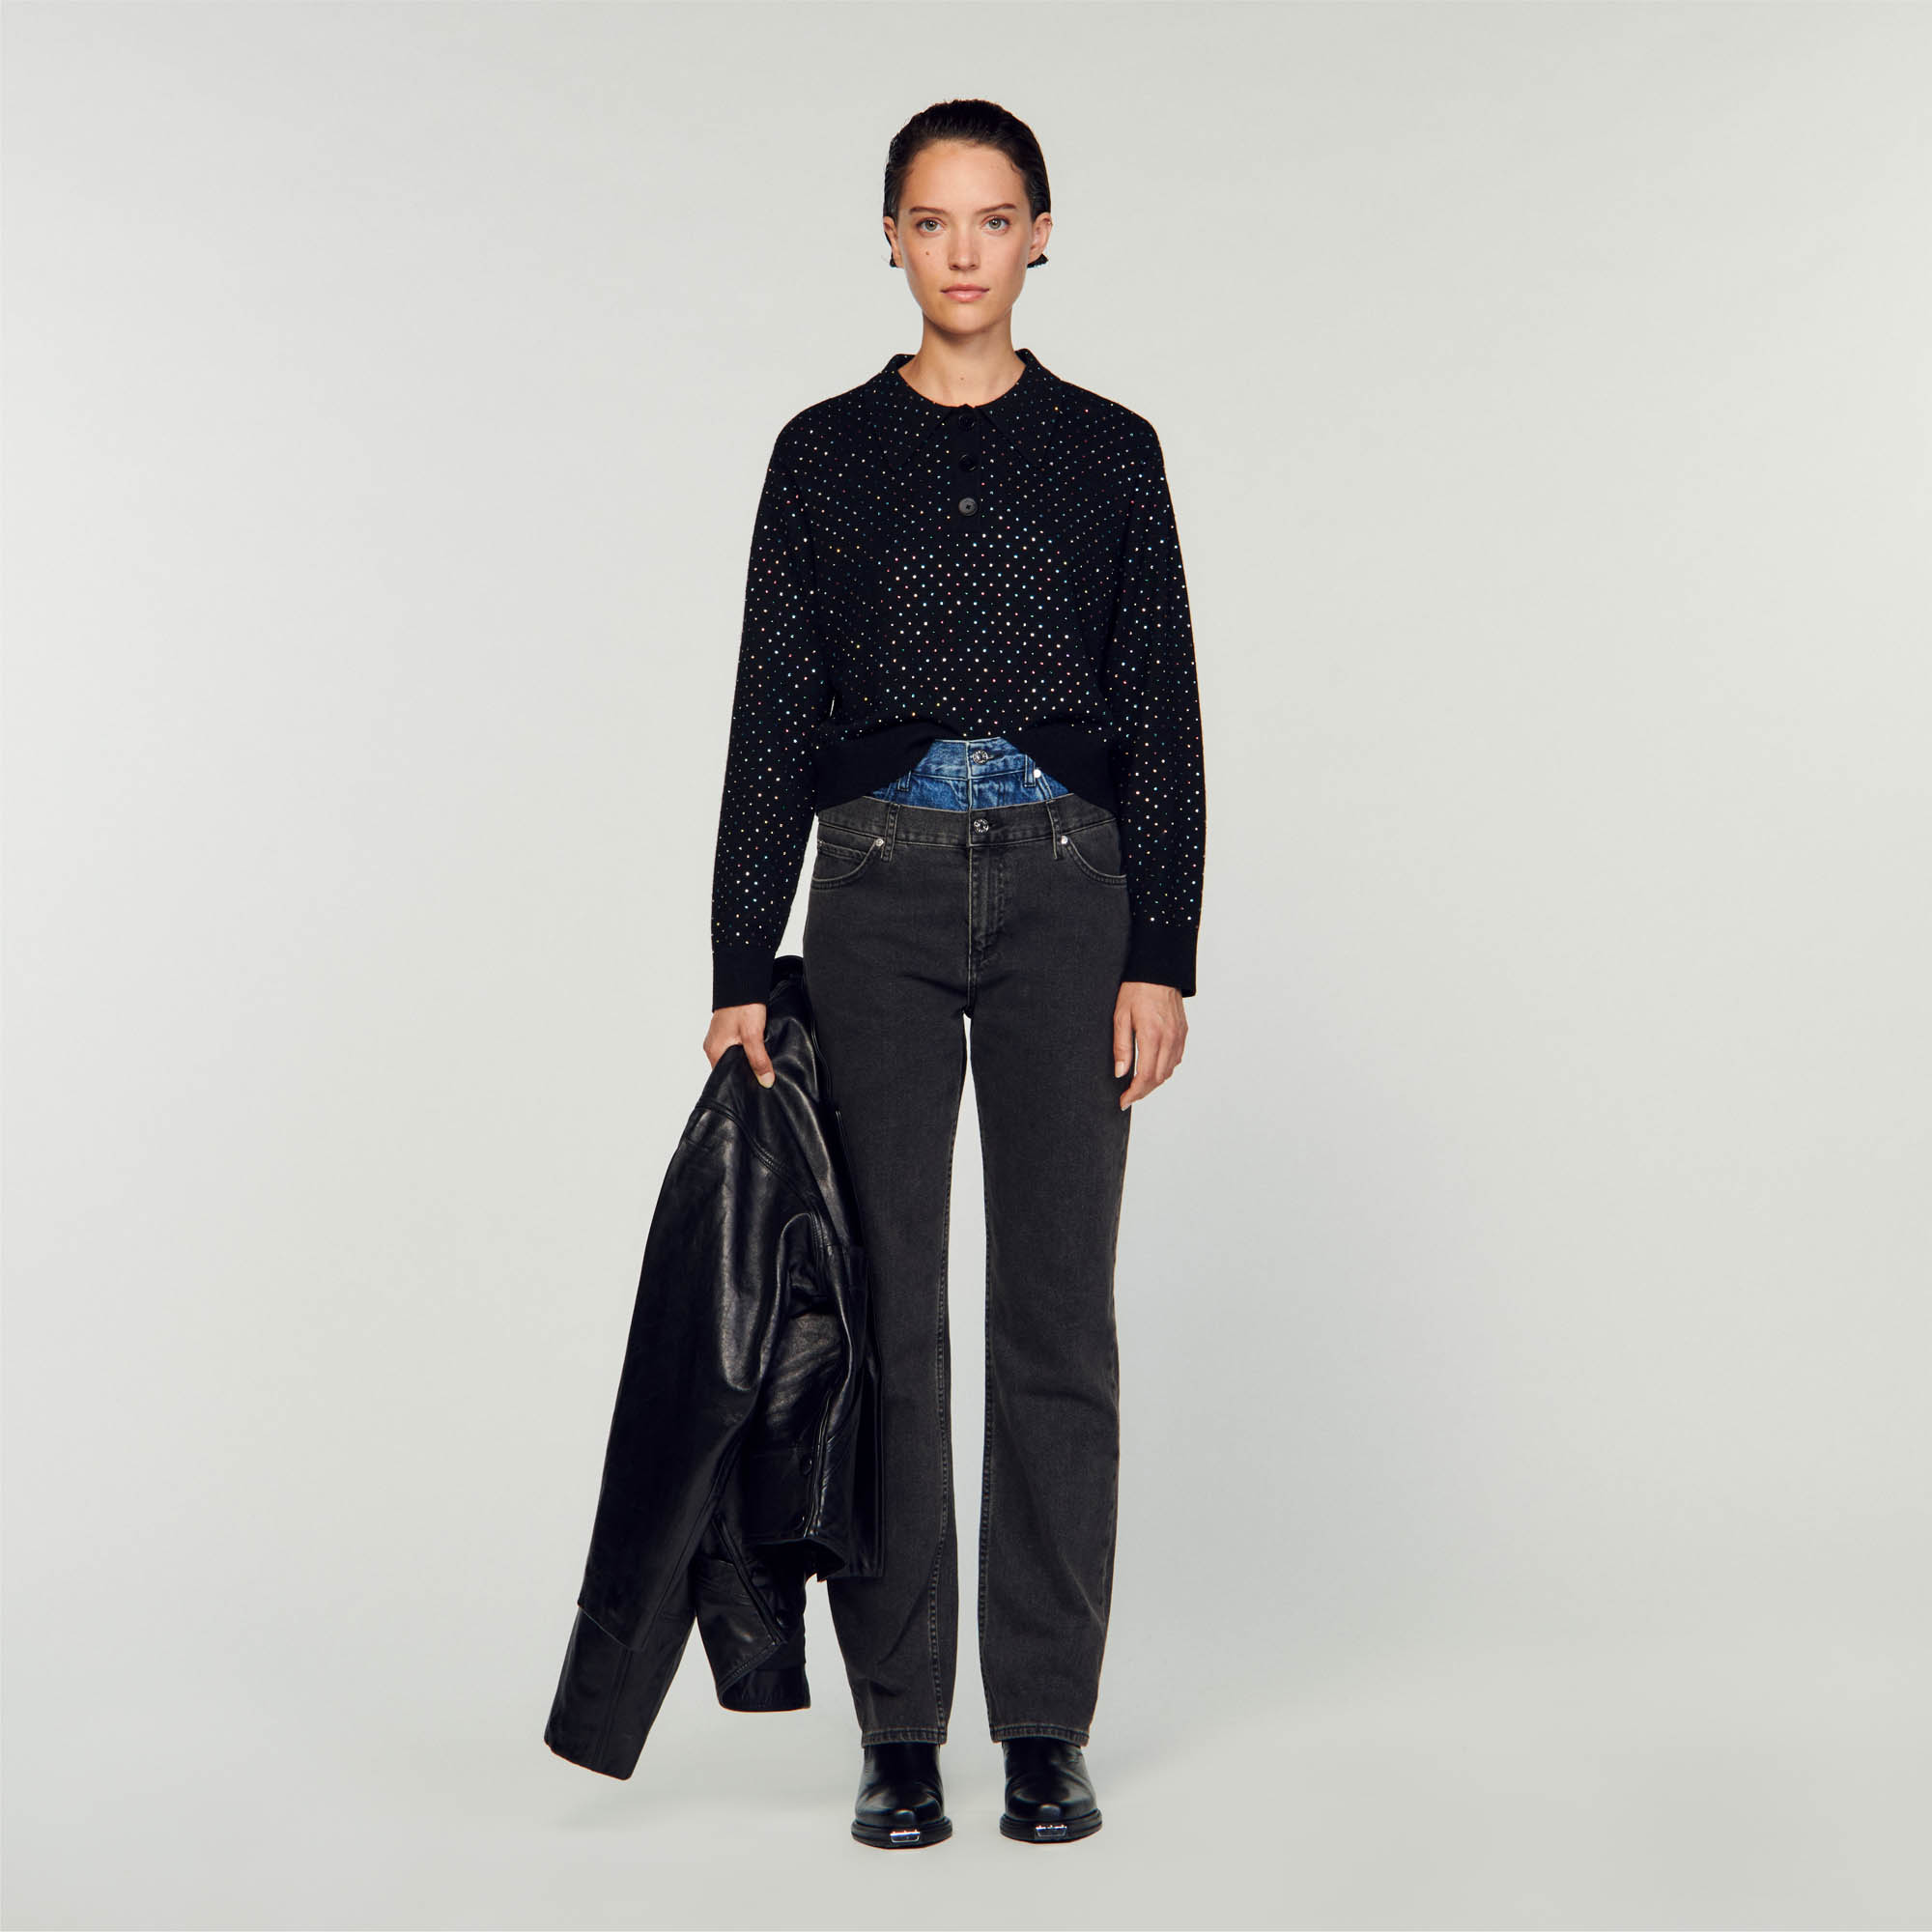 Sandro wool Cropped baggy sweater in a wool and cashmere blend knit, with a button-up polo neck, long sleeves and rhinestones